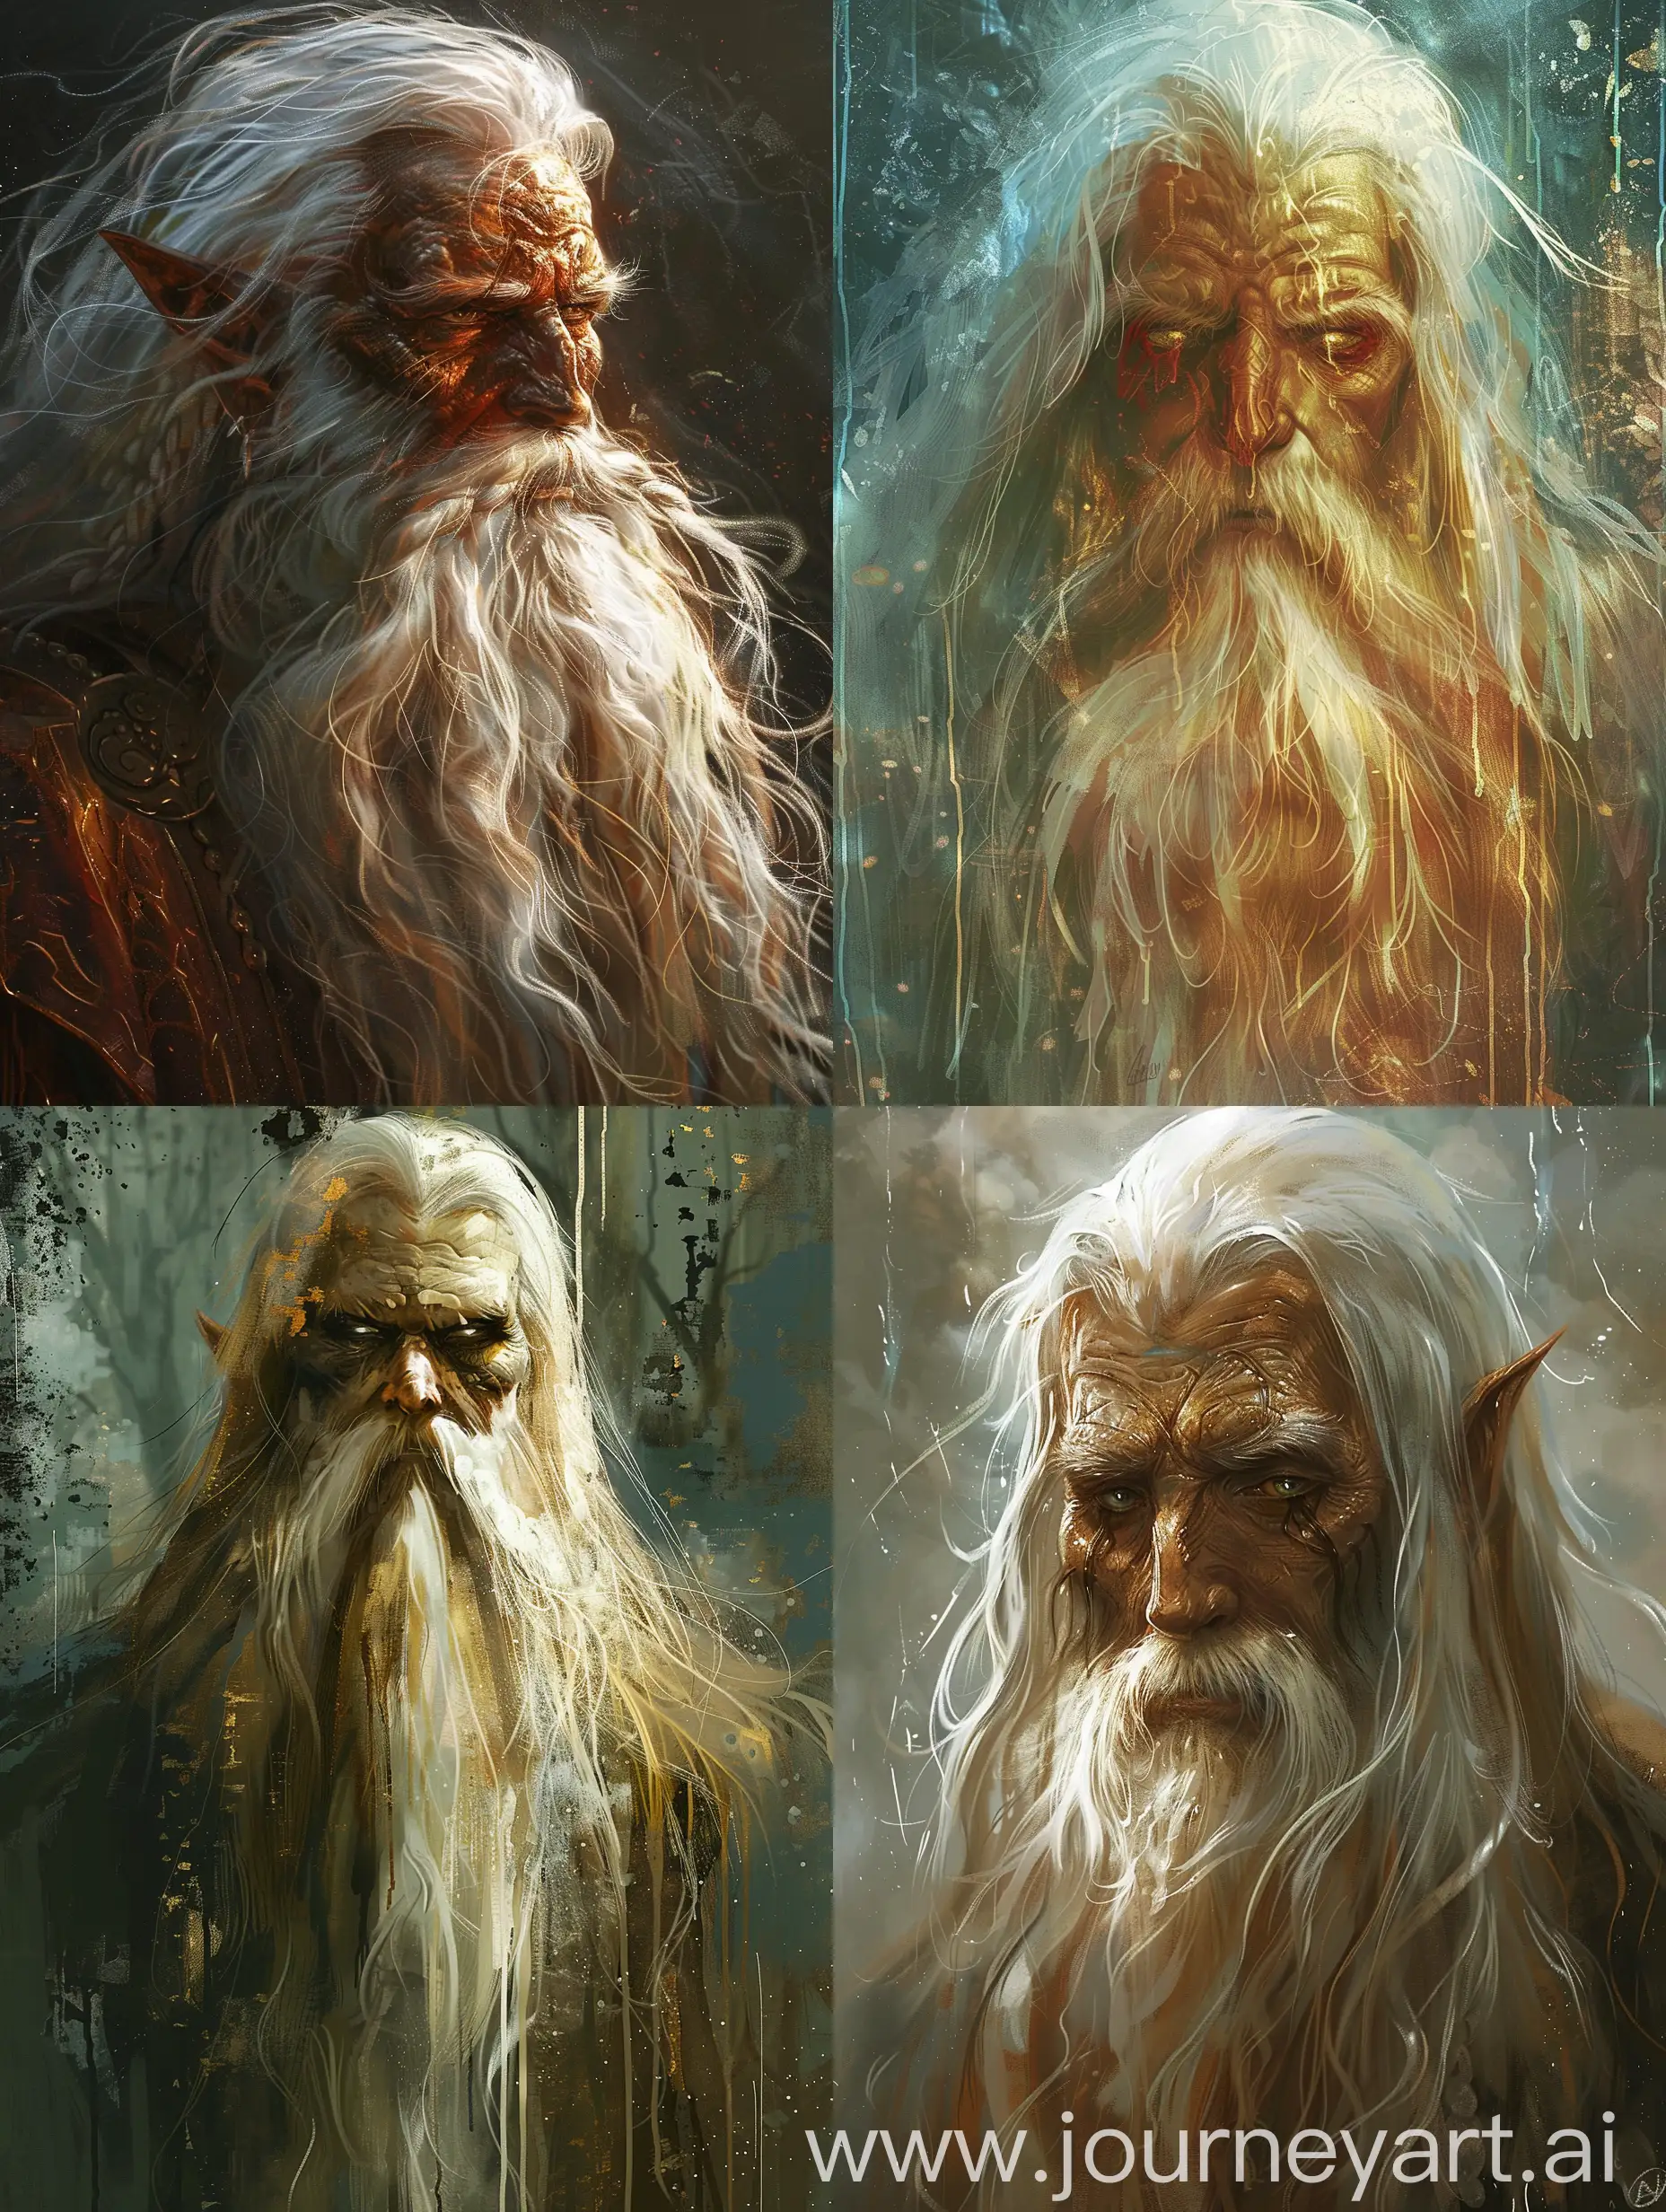 Subject; a supernatural wise teacher with a dangerous aura of calm and powerful serenity. Tall and bronze, long white hair and beard, magical eyes. 

Style and detail; fantasy inspired online Ai painting style, impasto, baroque, top notch, oil wet paint dripping layering, highly detailed. 